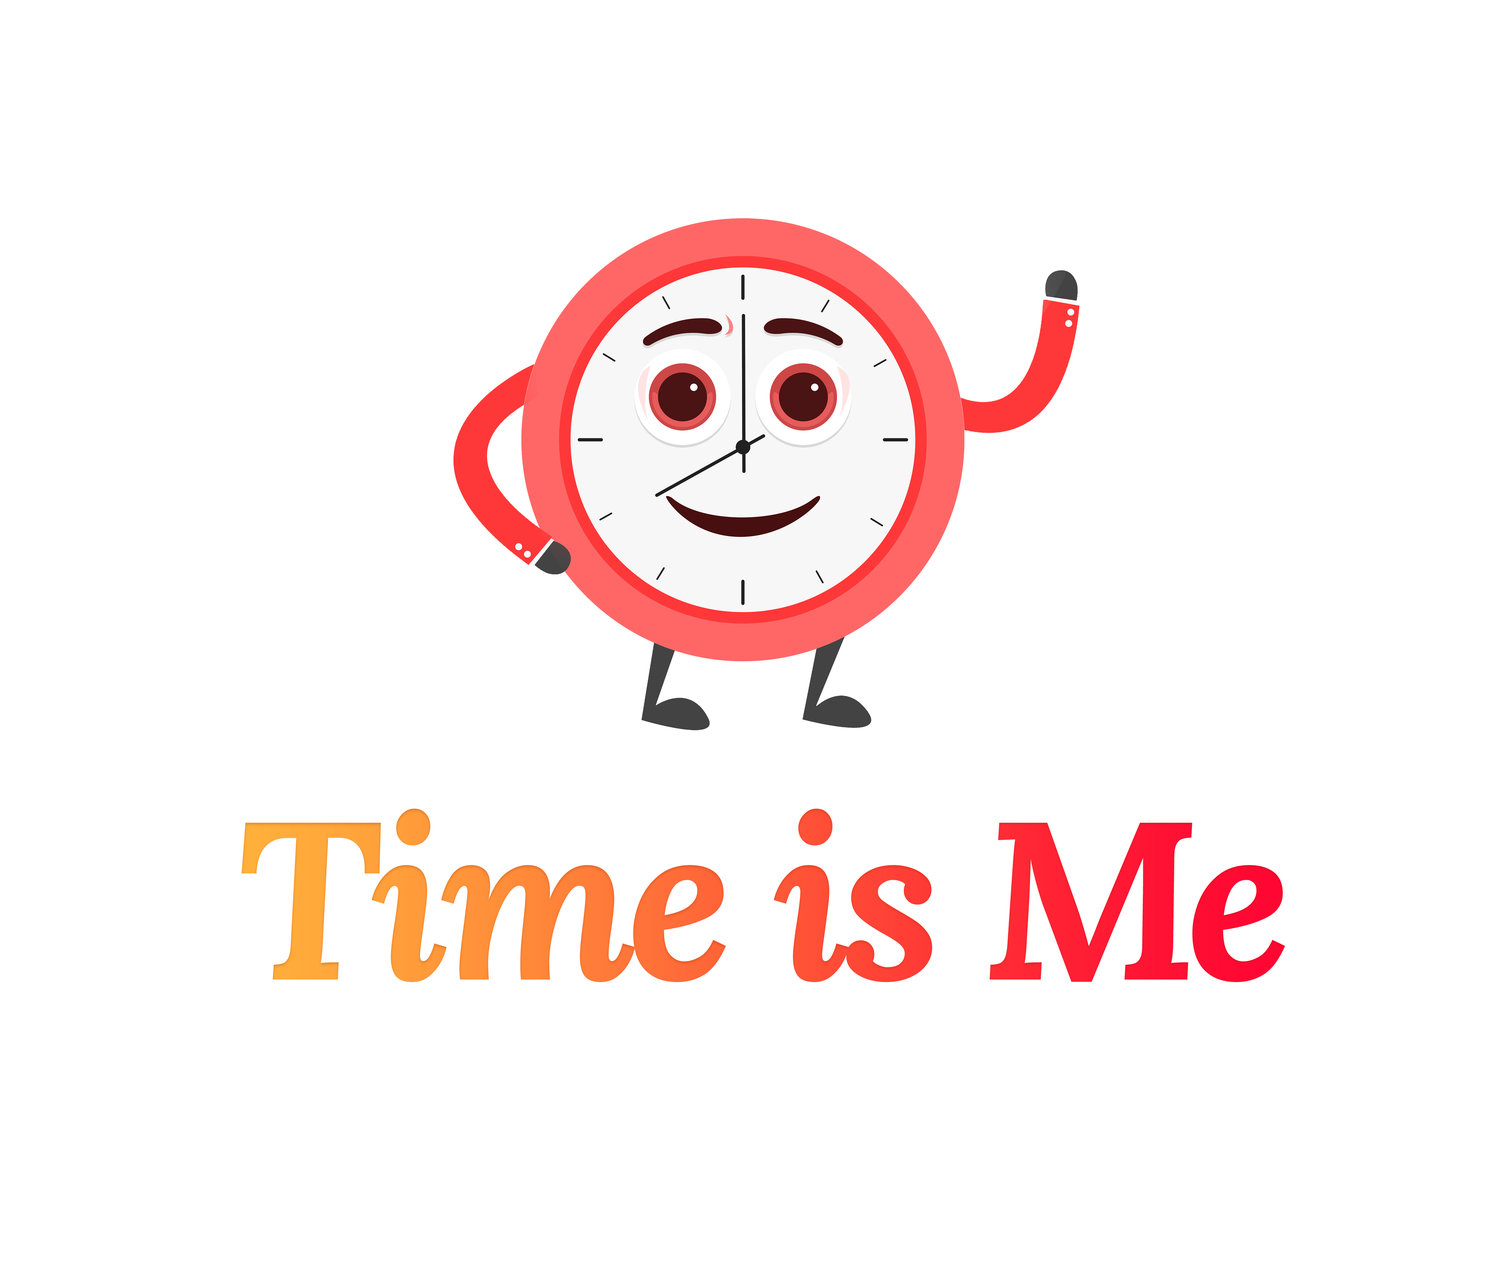 Time is Me